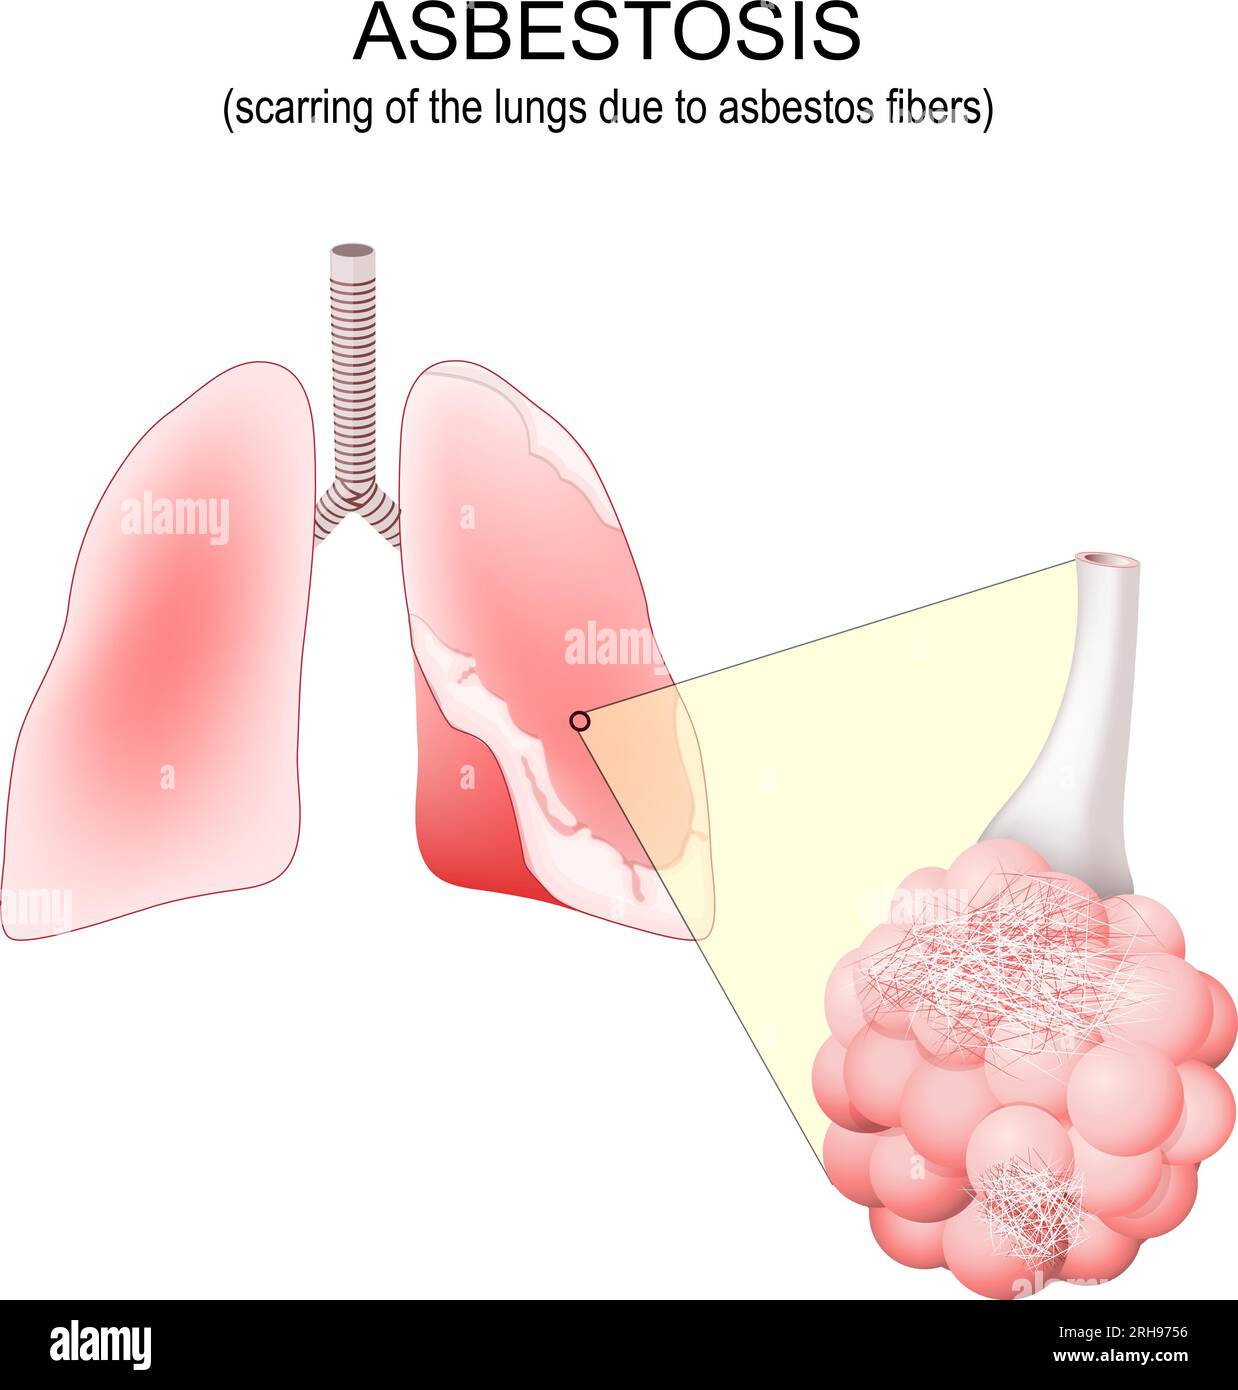 Asbestosis. scarring lungs. Human lungs with plaque that caused by asbestos. Close-up of alveolus with asbestos fibers. Vector illustration Stock Vector